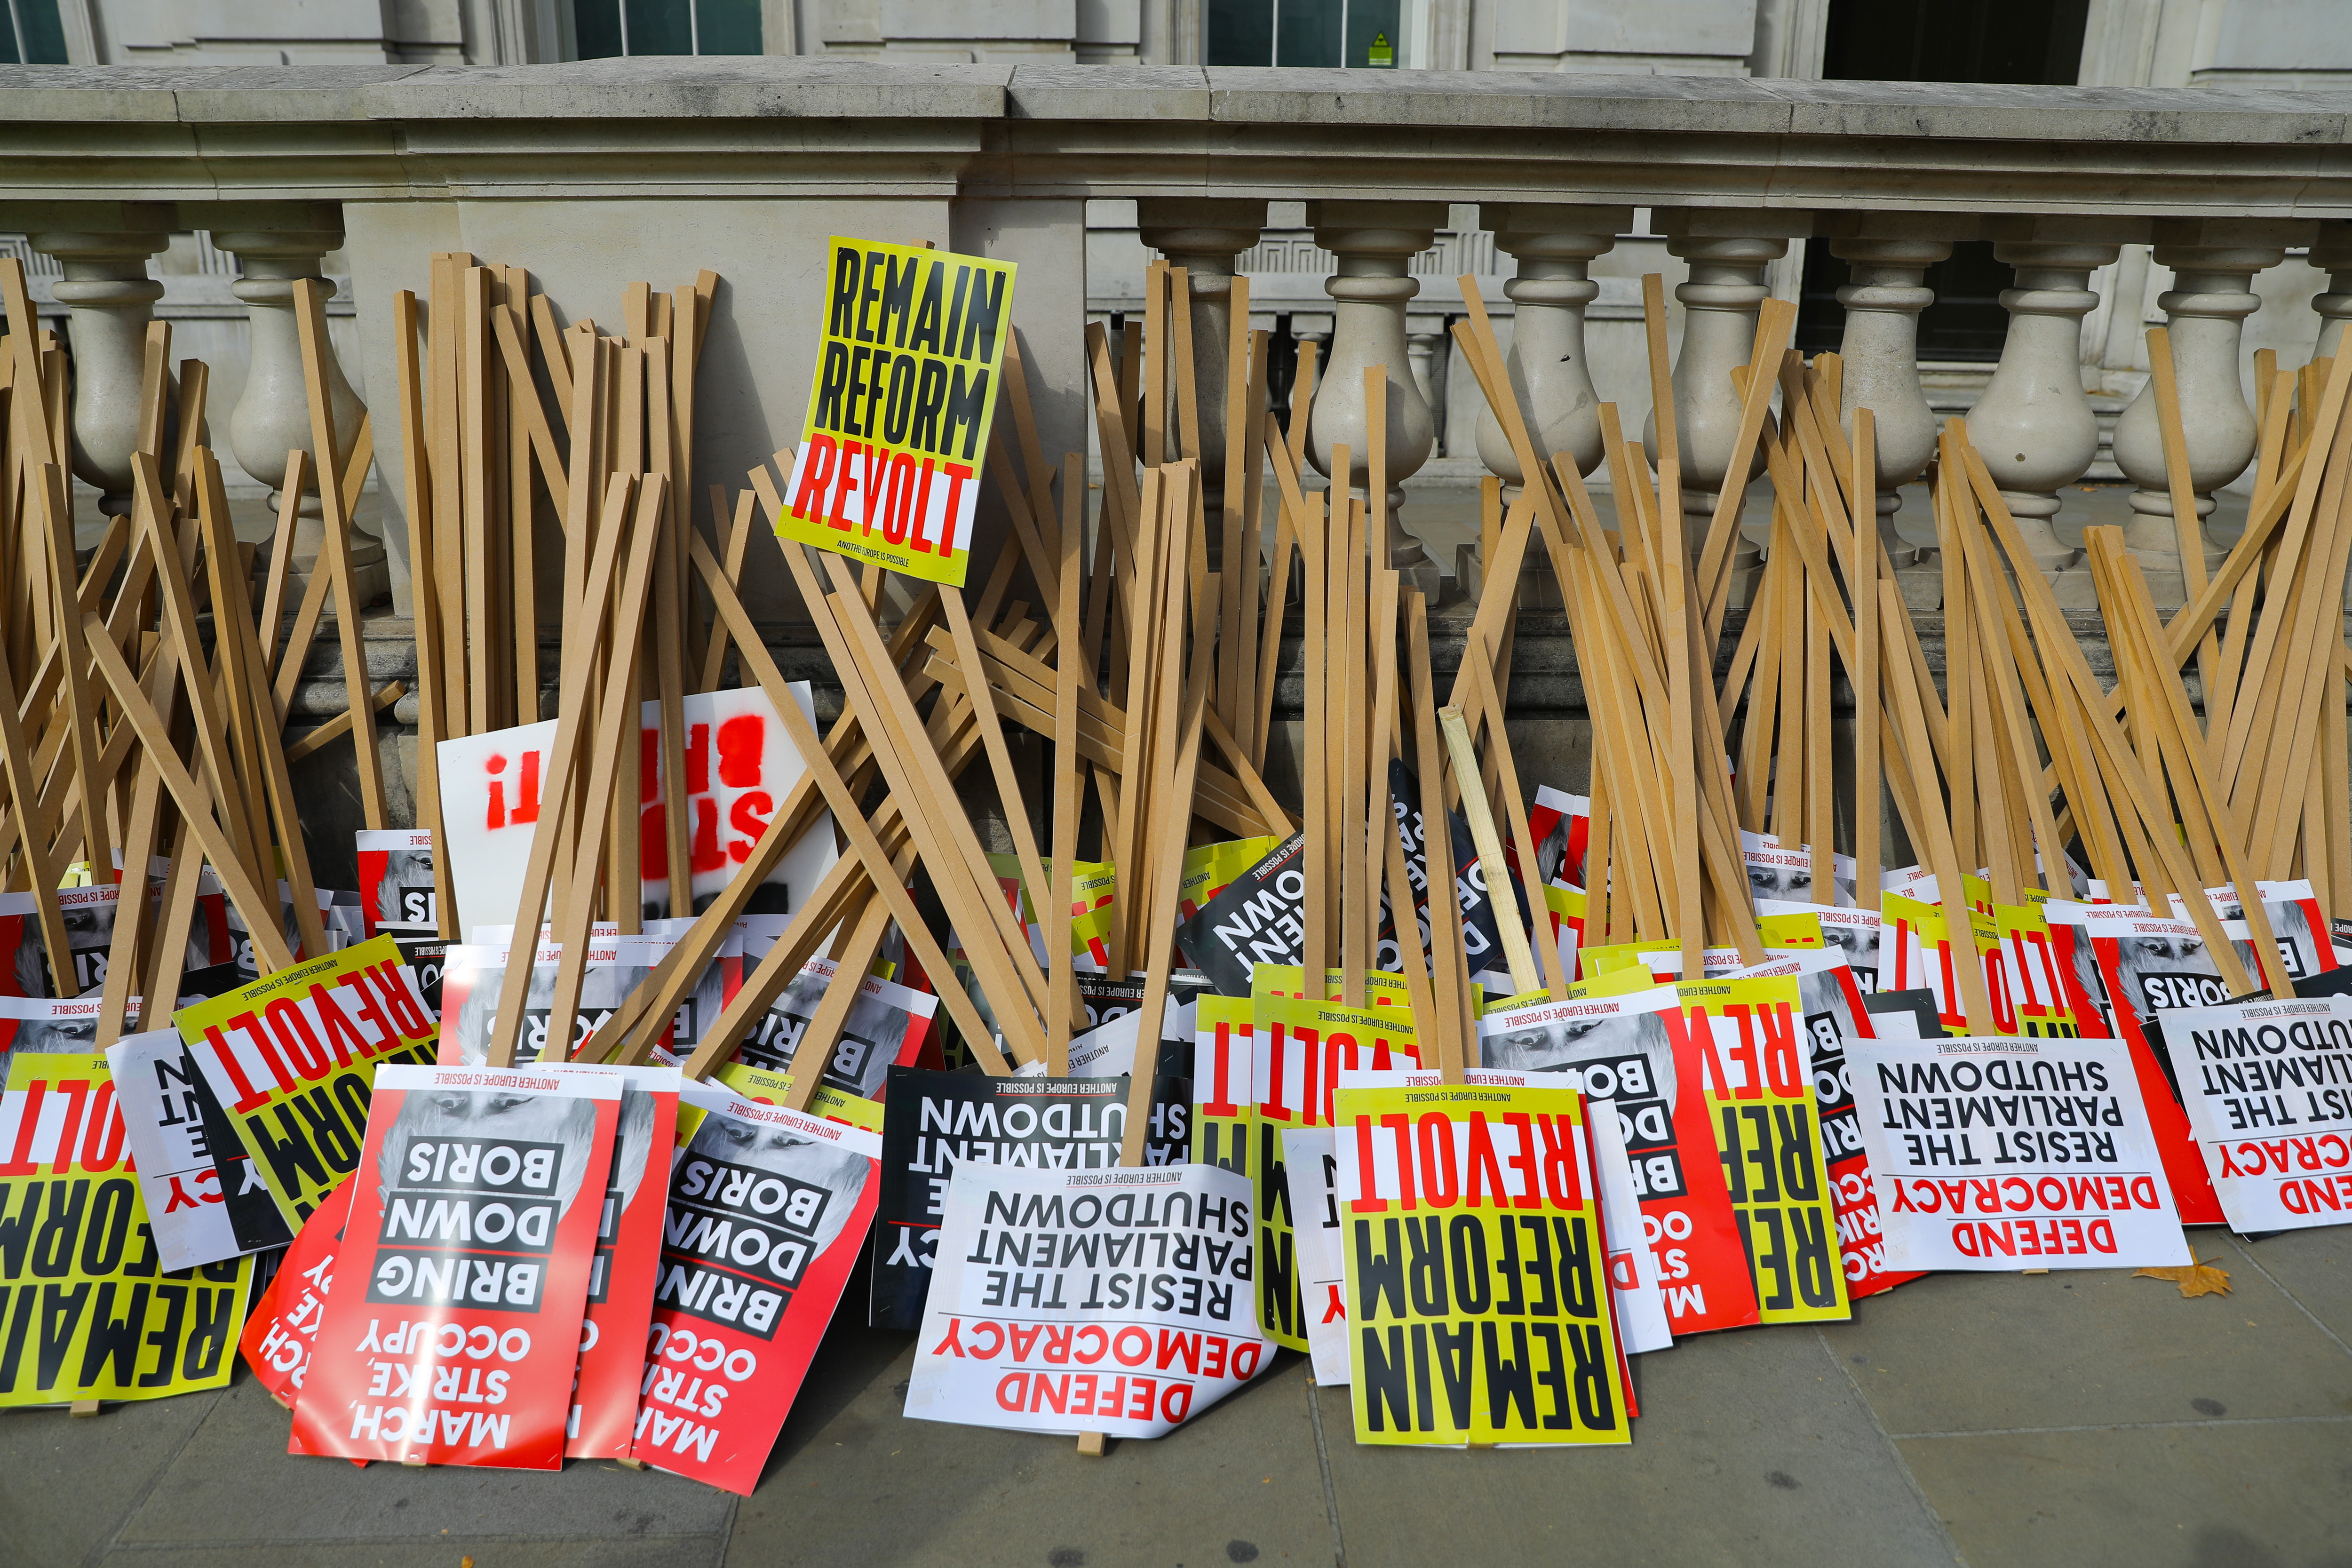 epa07806228 Placards lay on the ground outside Downing Street in Whitehall ahead of a protest against Brexit and the prorogation of parliament in London, Britain, 31 August 2019. A number of 'Stop The Coup' protests are taking place across Britain today against Prime Minister Boris Johnson's move to suspend parliament.  EPA/VICKIE FLORES